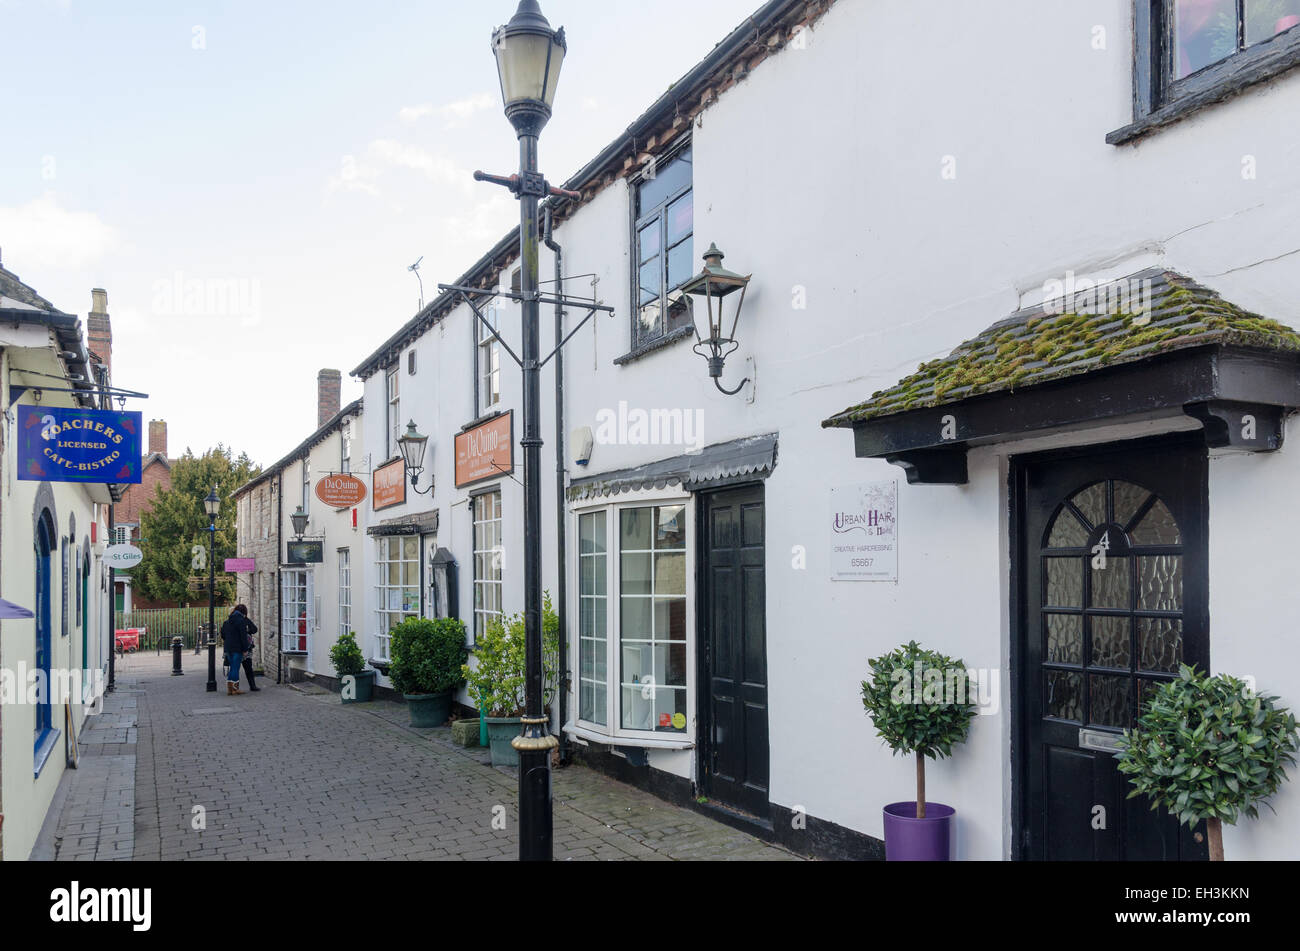 Row of shops in Little Church Lane in Tamworth, Staffordshire Stock Photo